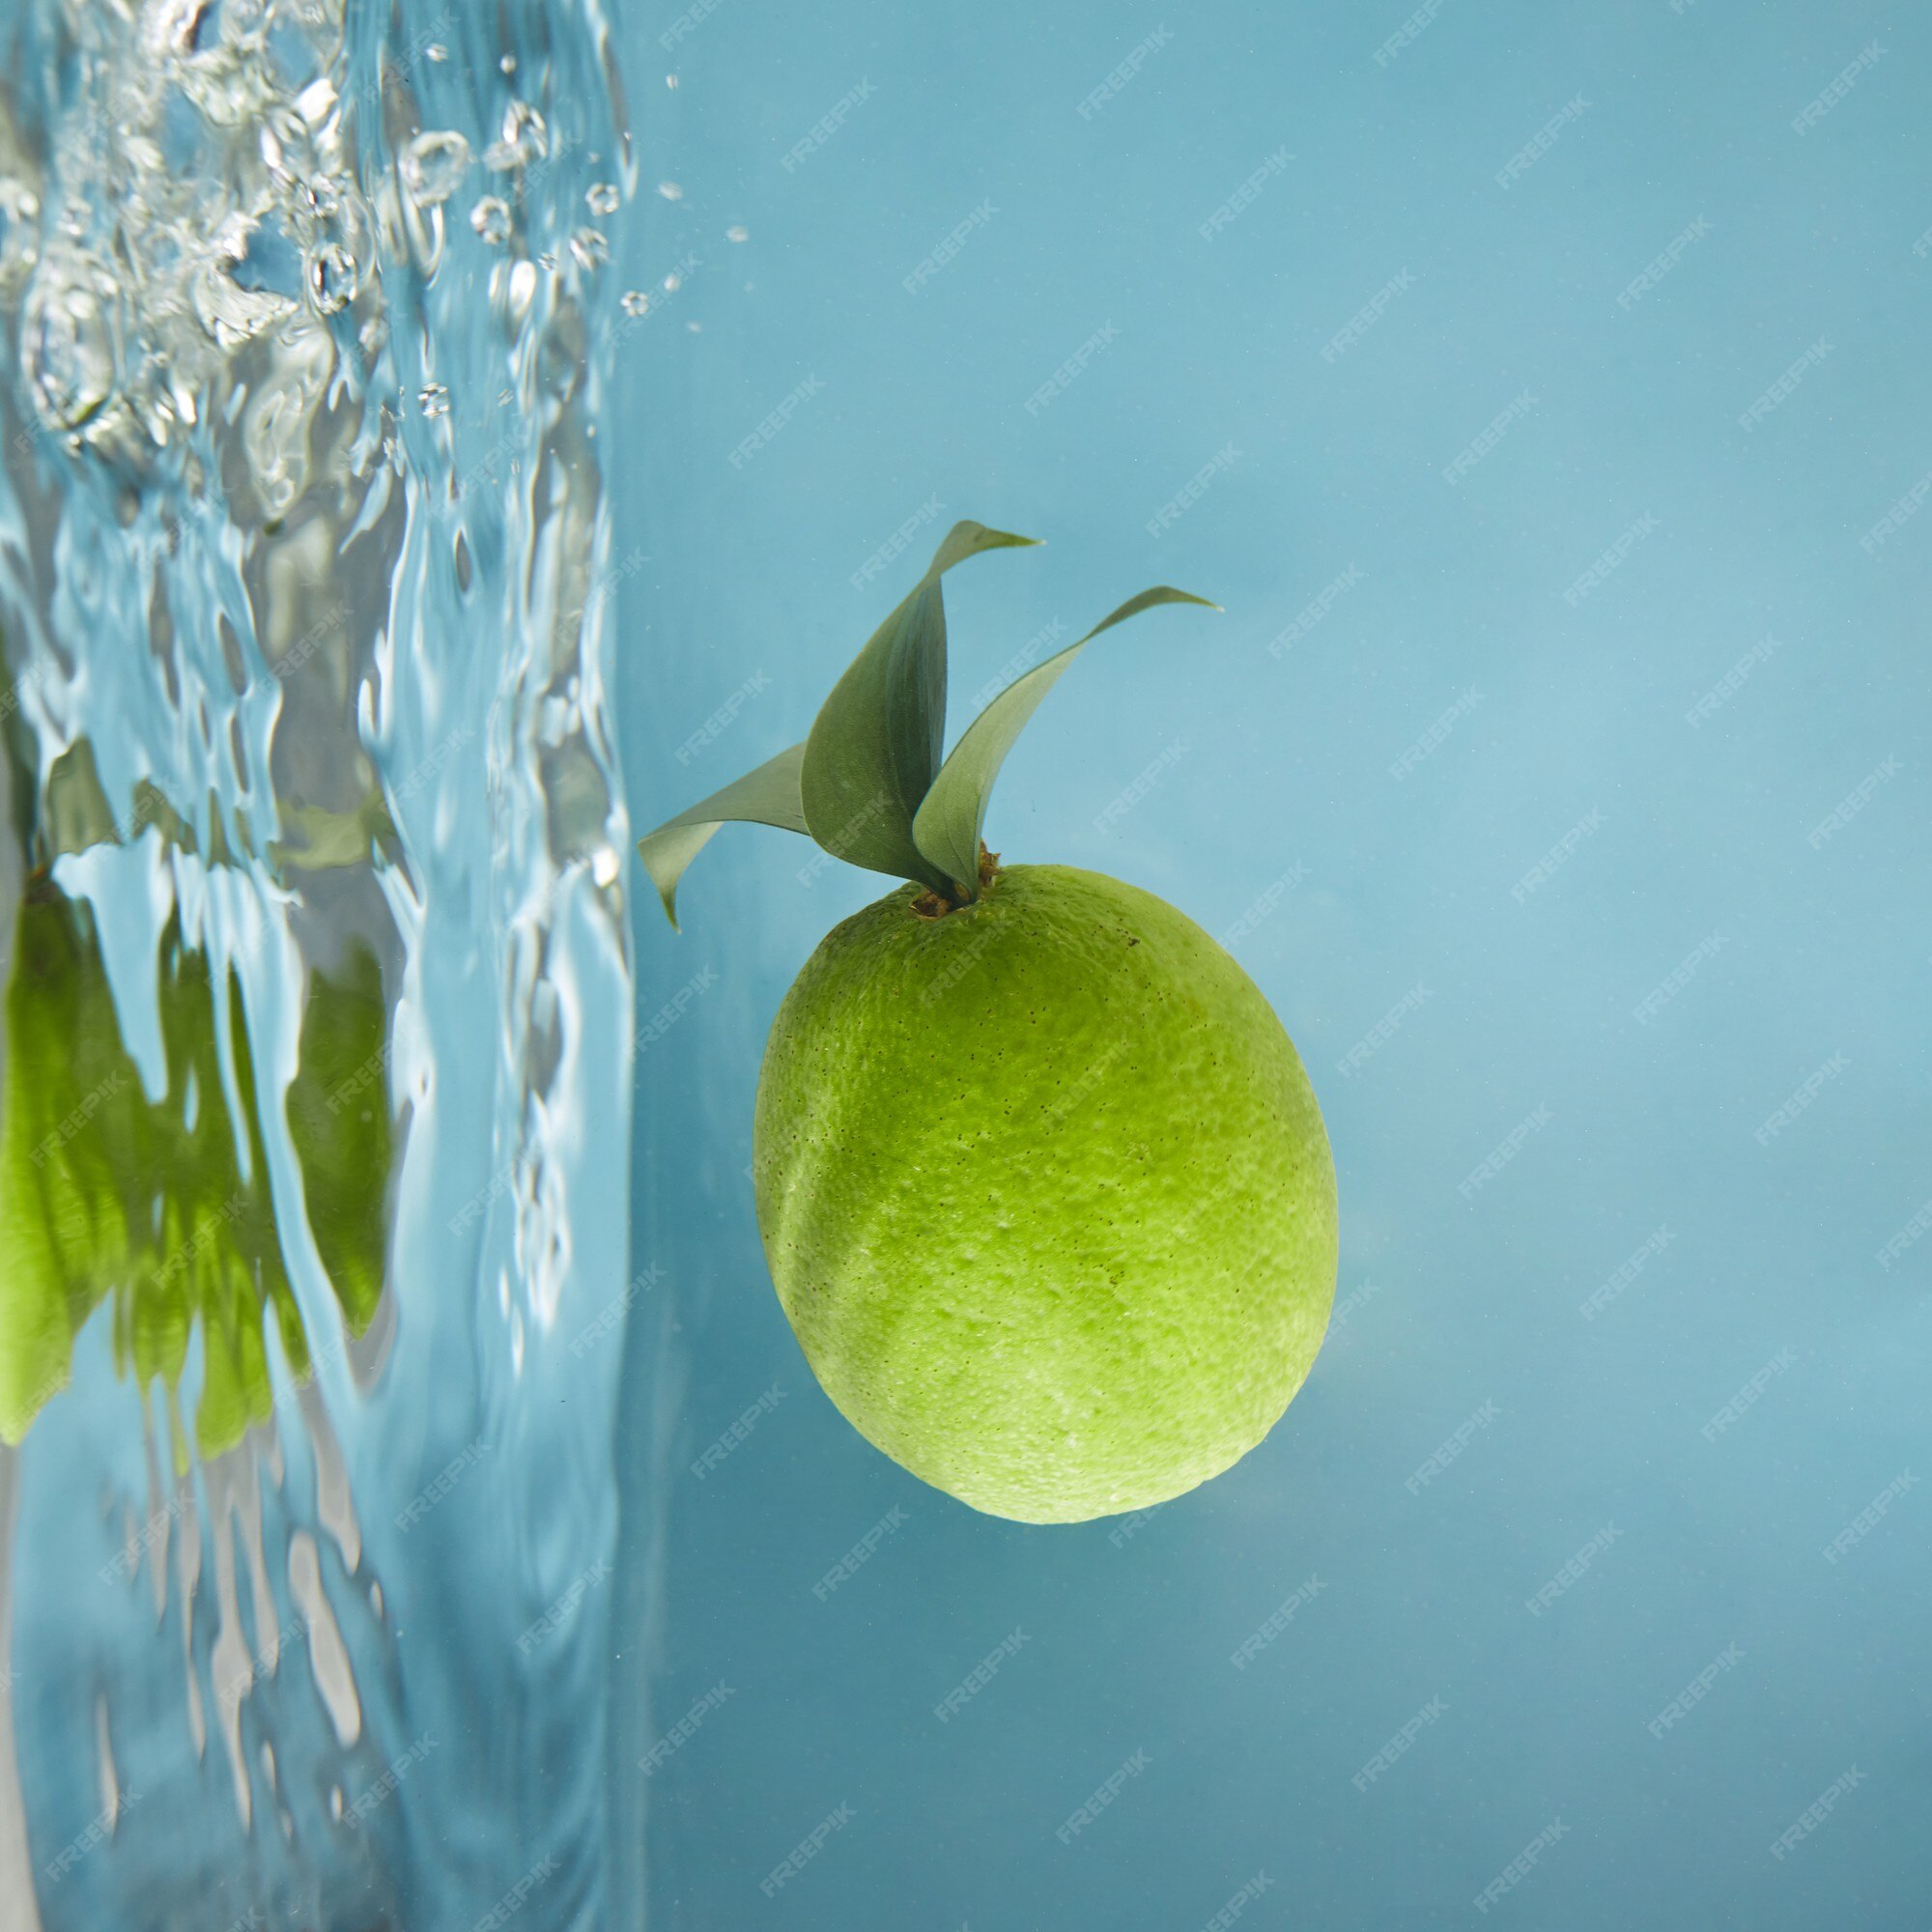 Premium Photo | Green fresh lime with leaves in water, a reflection of ...